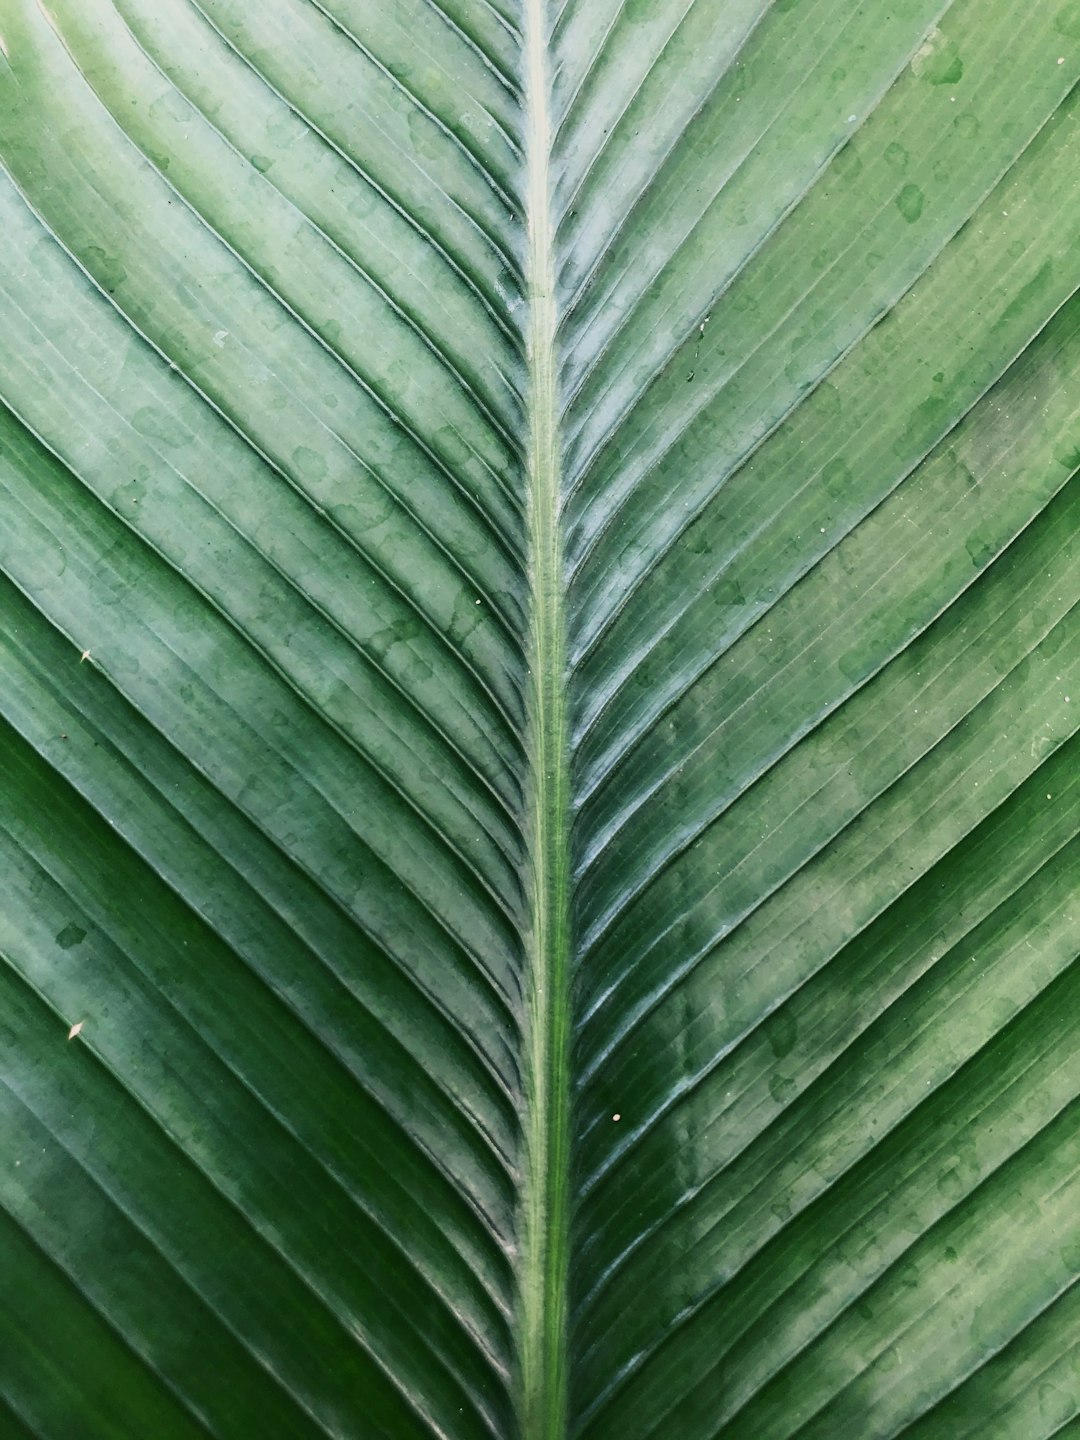 shallow focus photo of green leaf